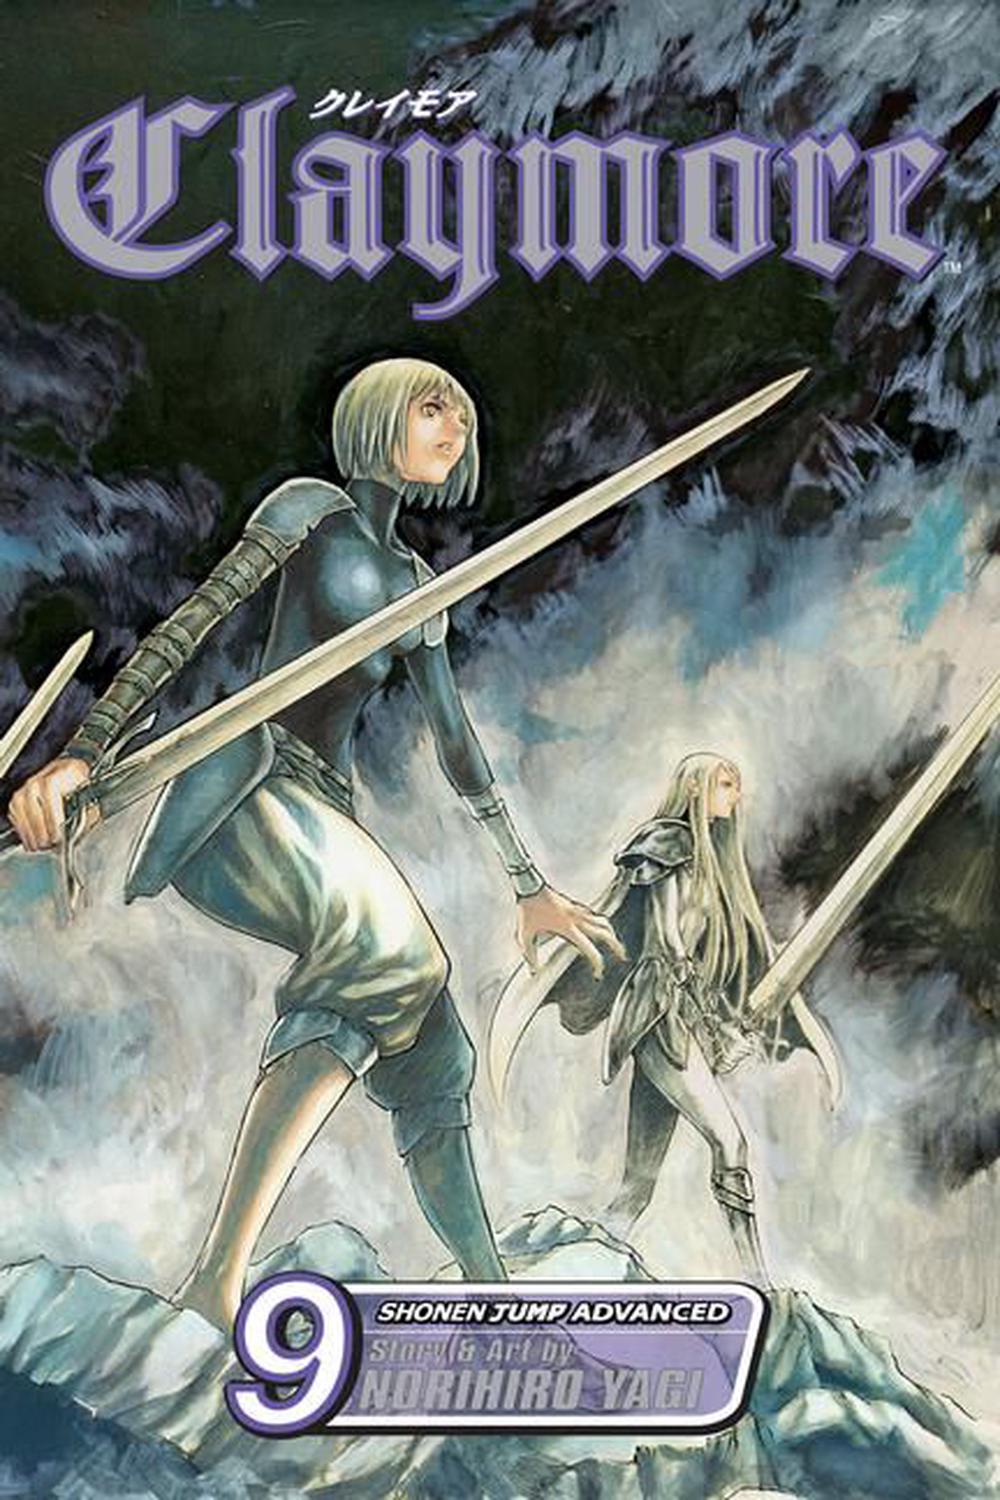 Claymore Volume 9 By Norihiro Yagi Paperback Buy Online At The Nile